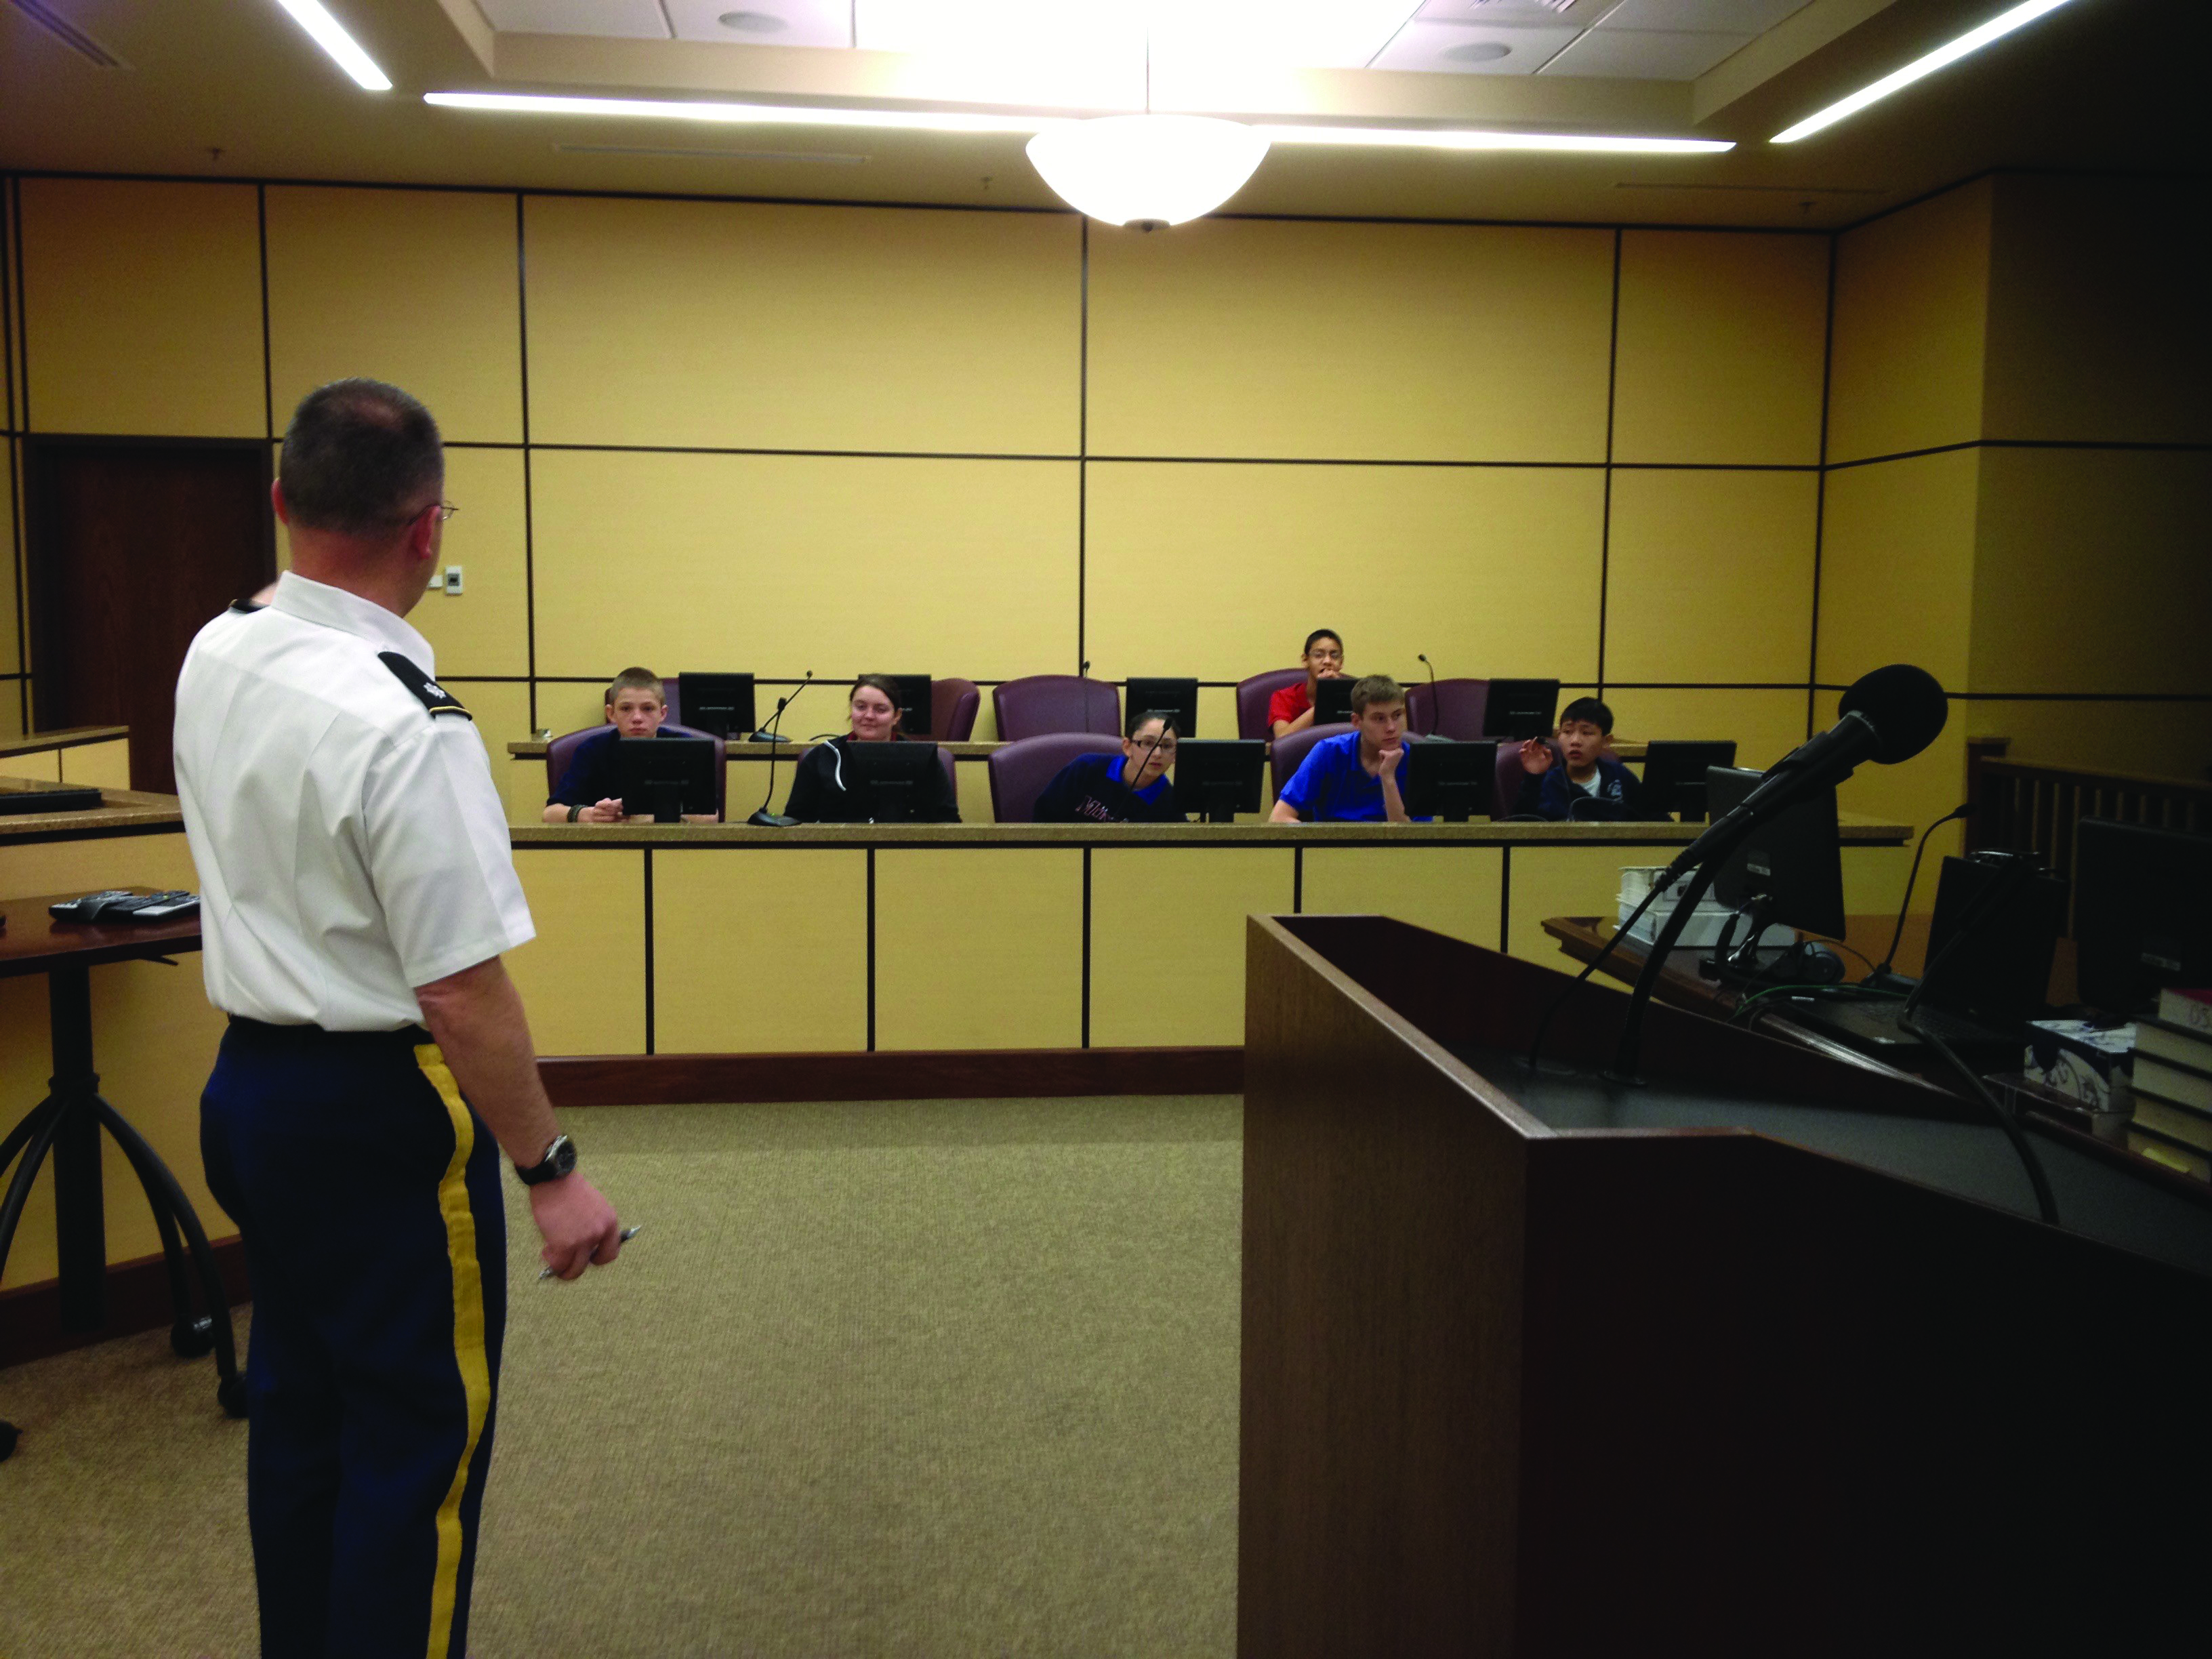 Then-LTC Hayes instructing local junior high-school students, and perhaps future judge advocates, before presiding over their mock trial in Fort Bliss, TX, circa
        2014. (Photo courtesy of author)